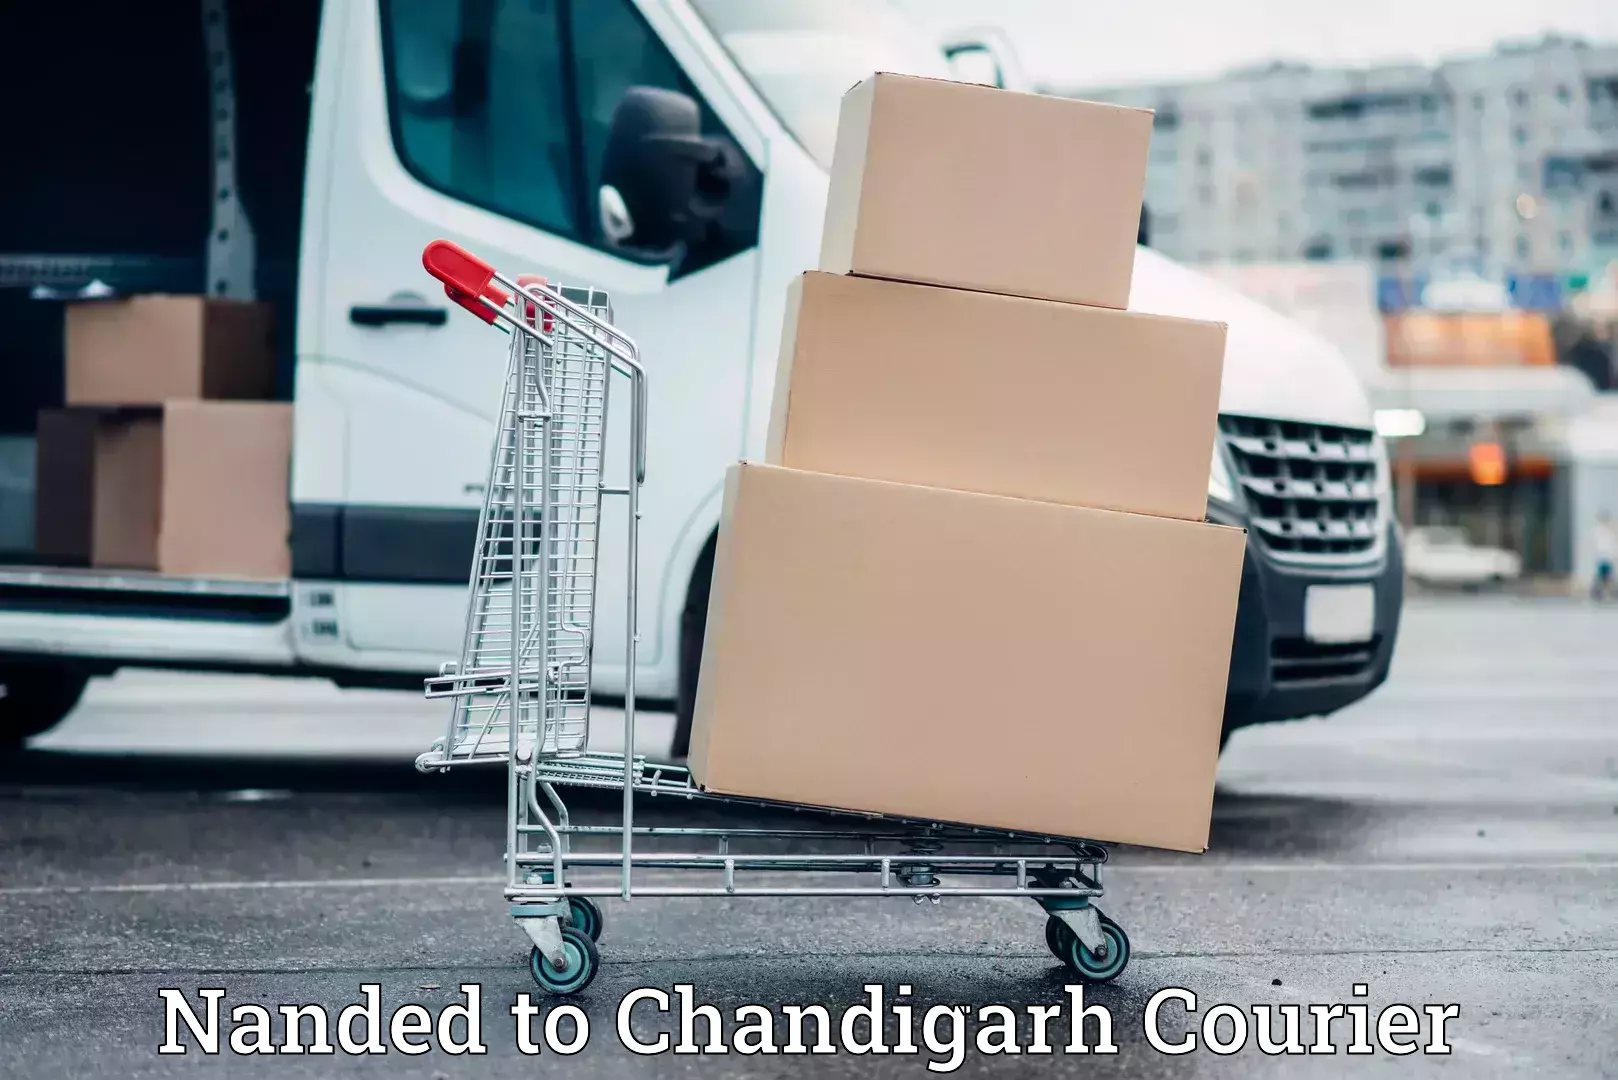 Furniture transport experts Nanded to Chandigarh